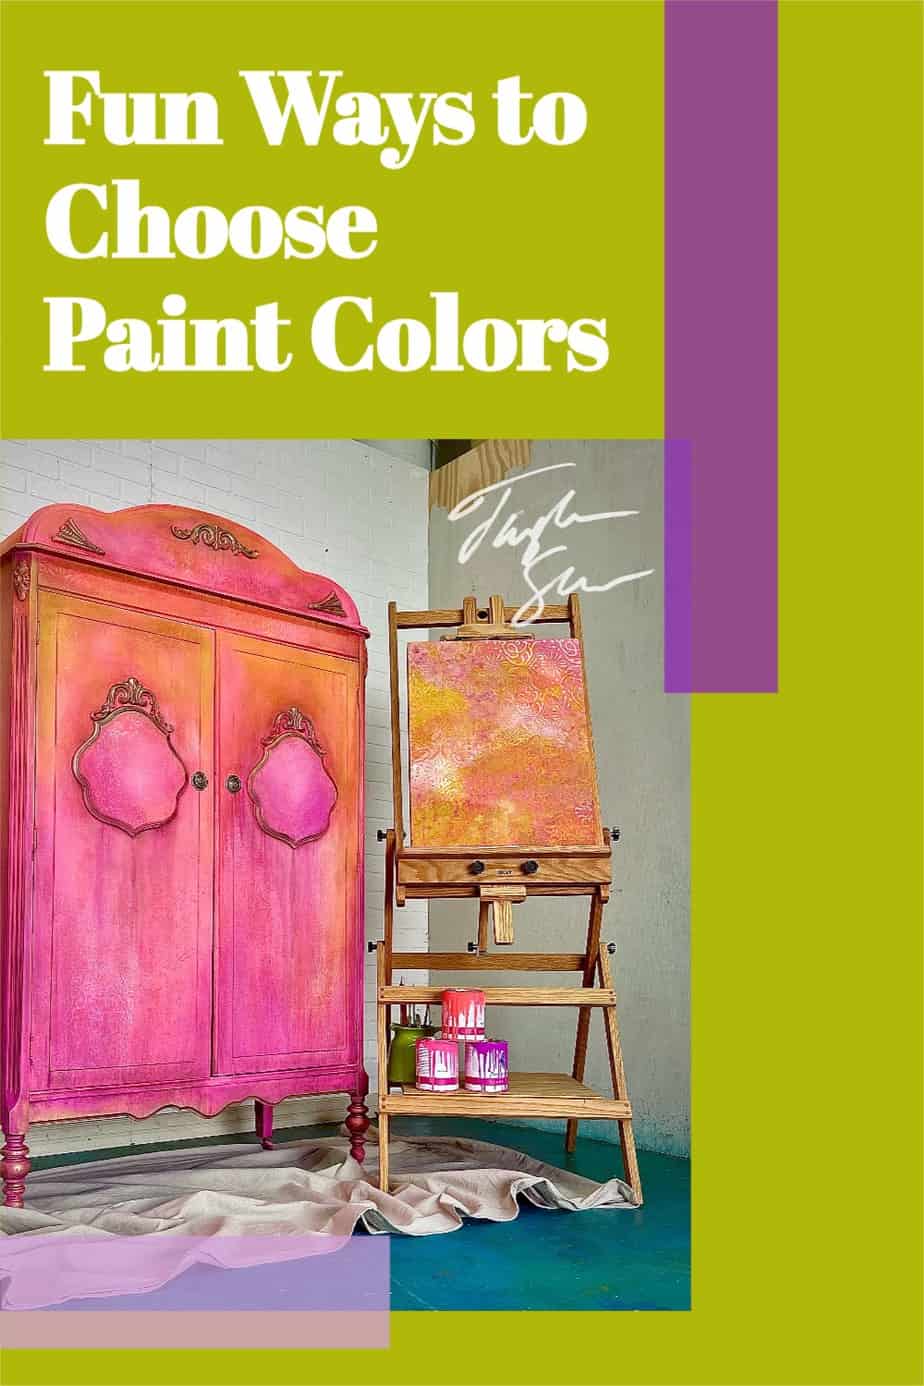 Choosing Paint Colors for Furniture in Unexpected Ways